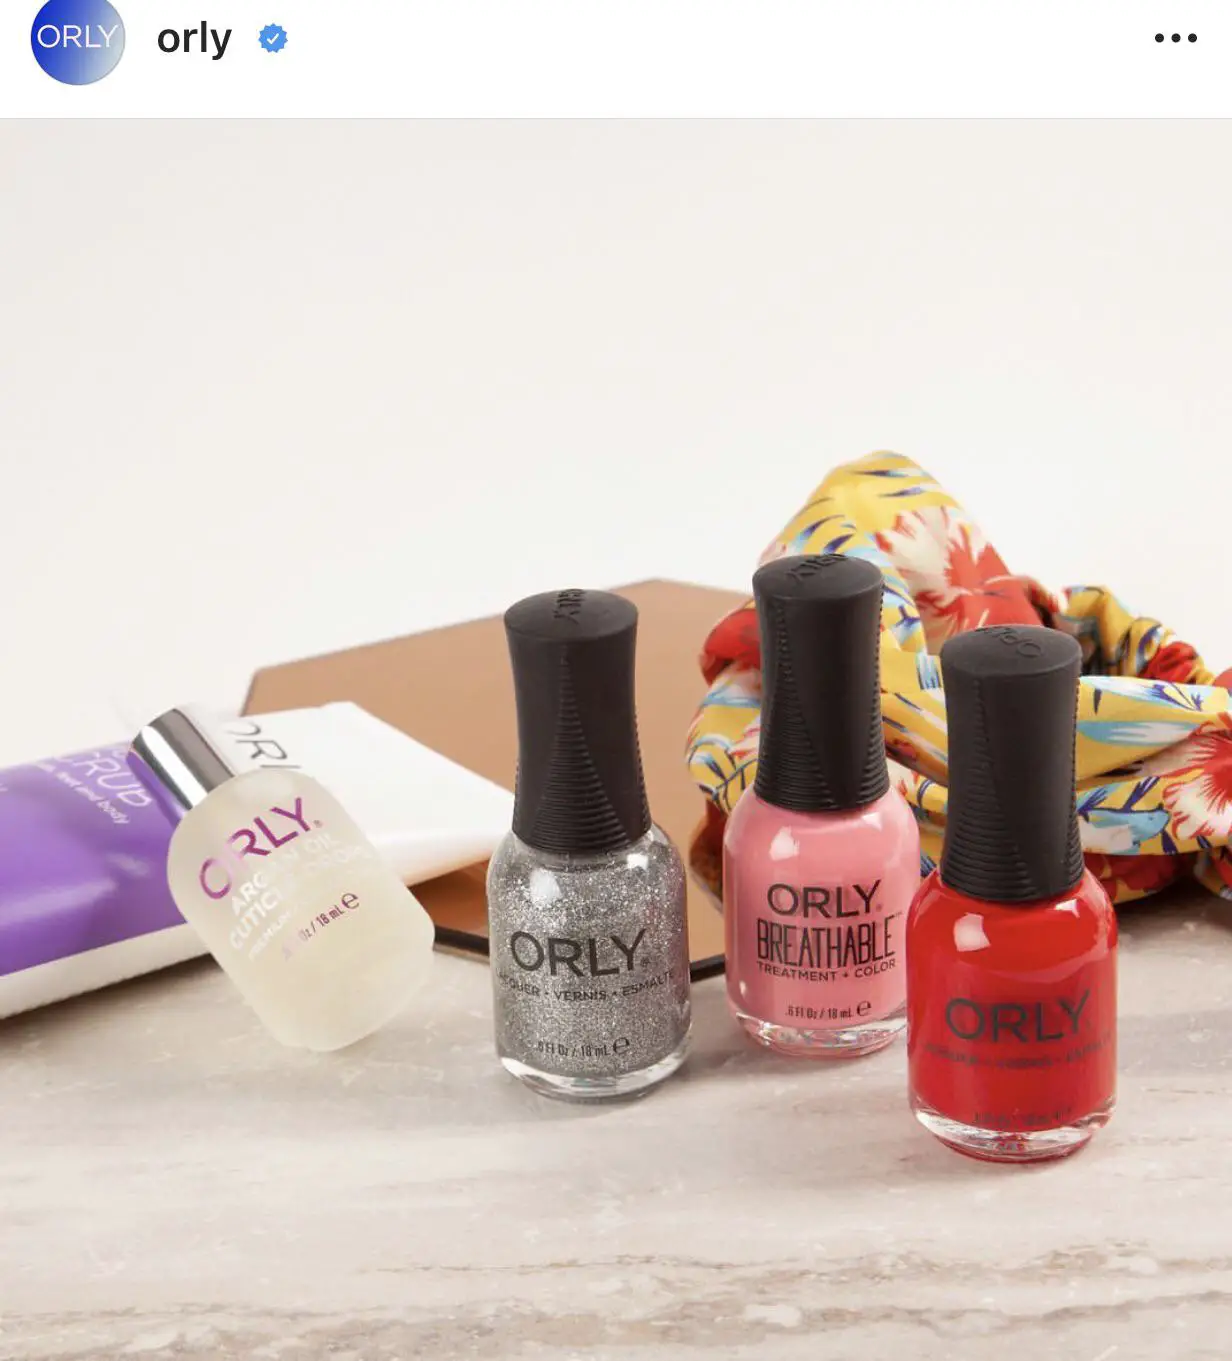 Orly nail polishes 40% off, free shipping at $15! : MUAontheCheap